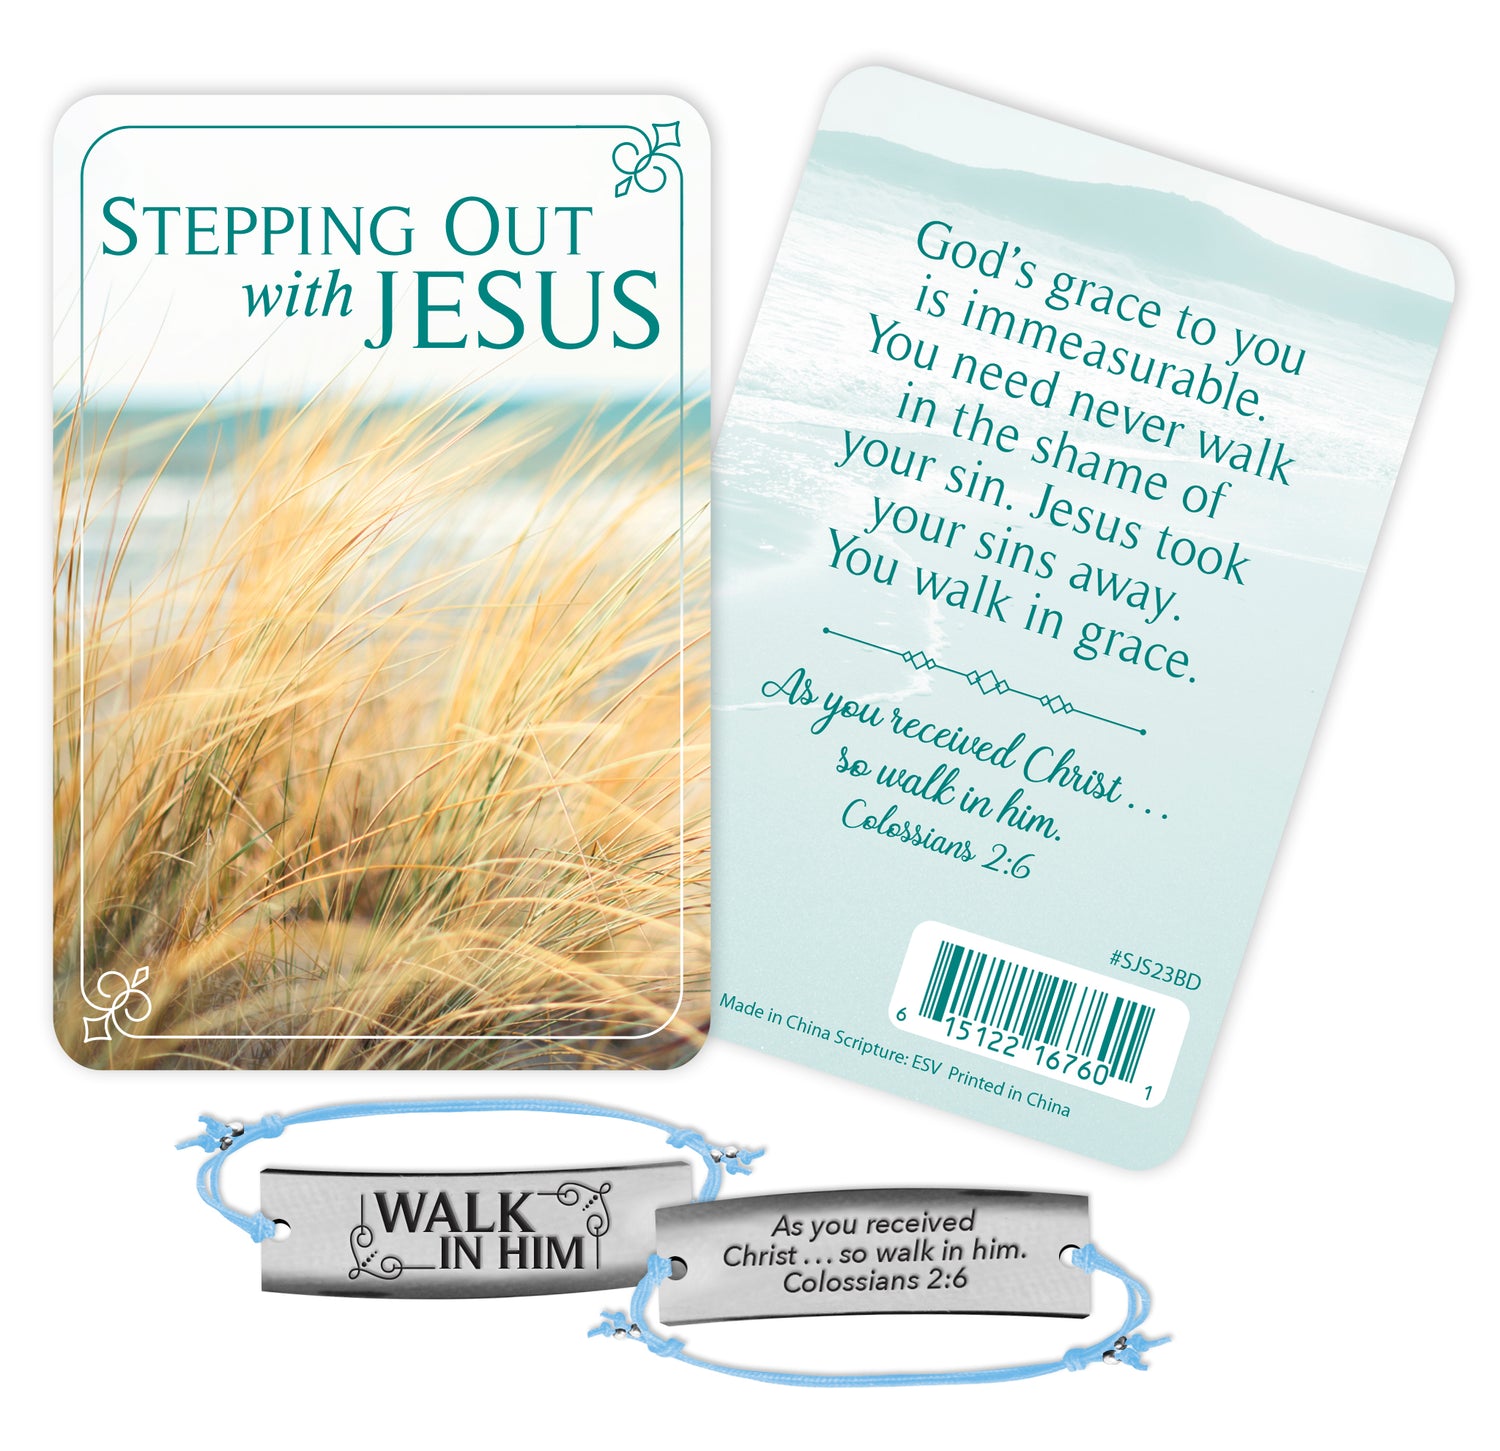 Walk in Him Christian women's bracelet and card - Stepping Out with Jesus